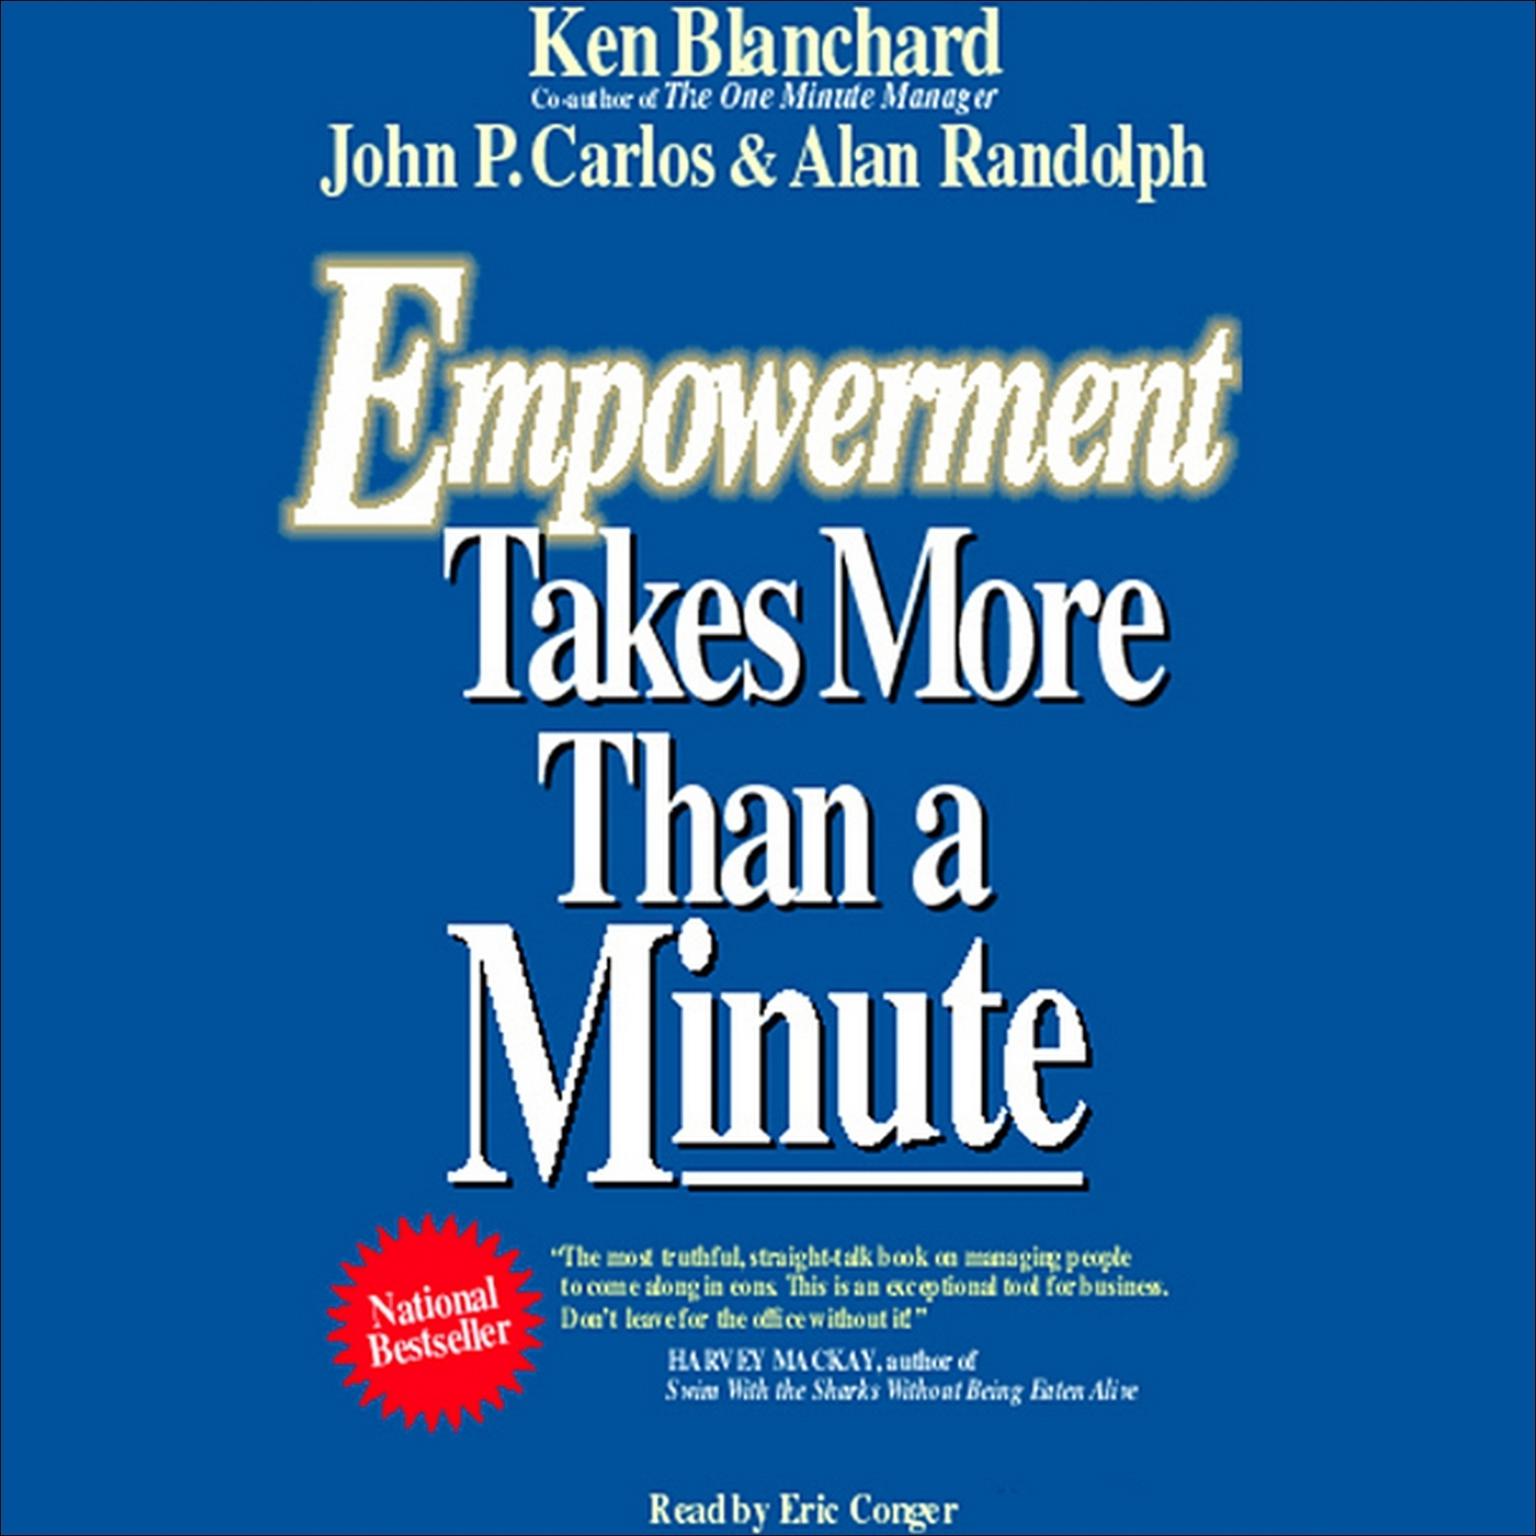 Empowerment Takes More Than a Minute (Abridged) Audiobook, by Ken Blanchard